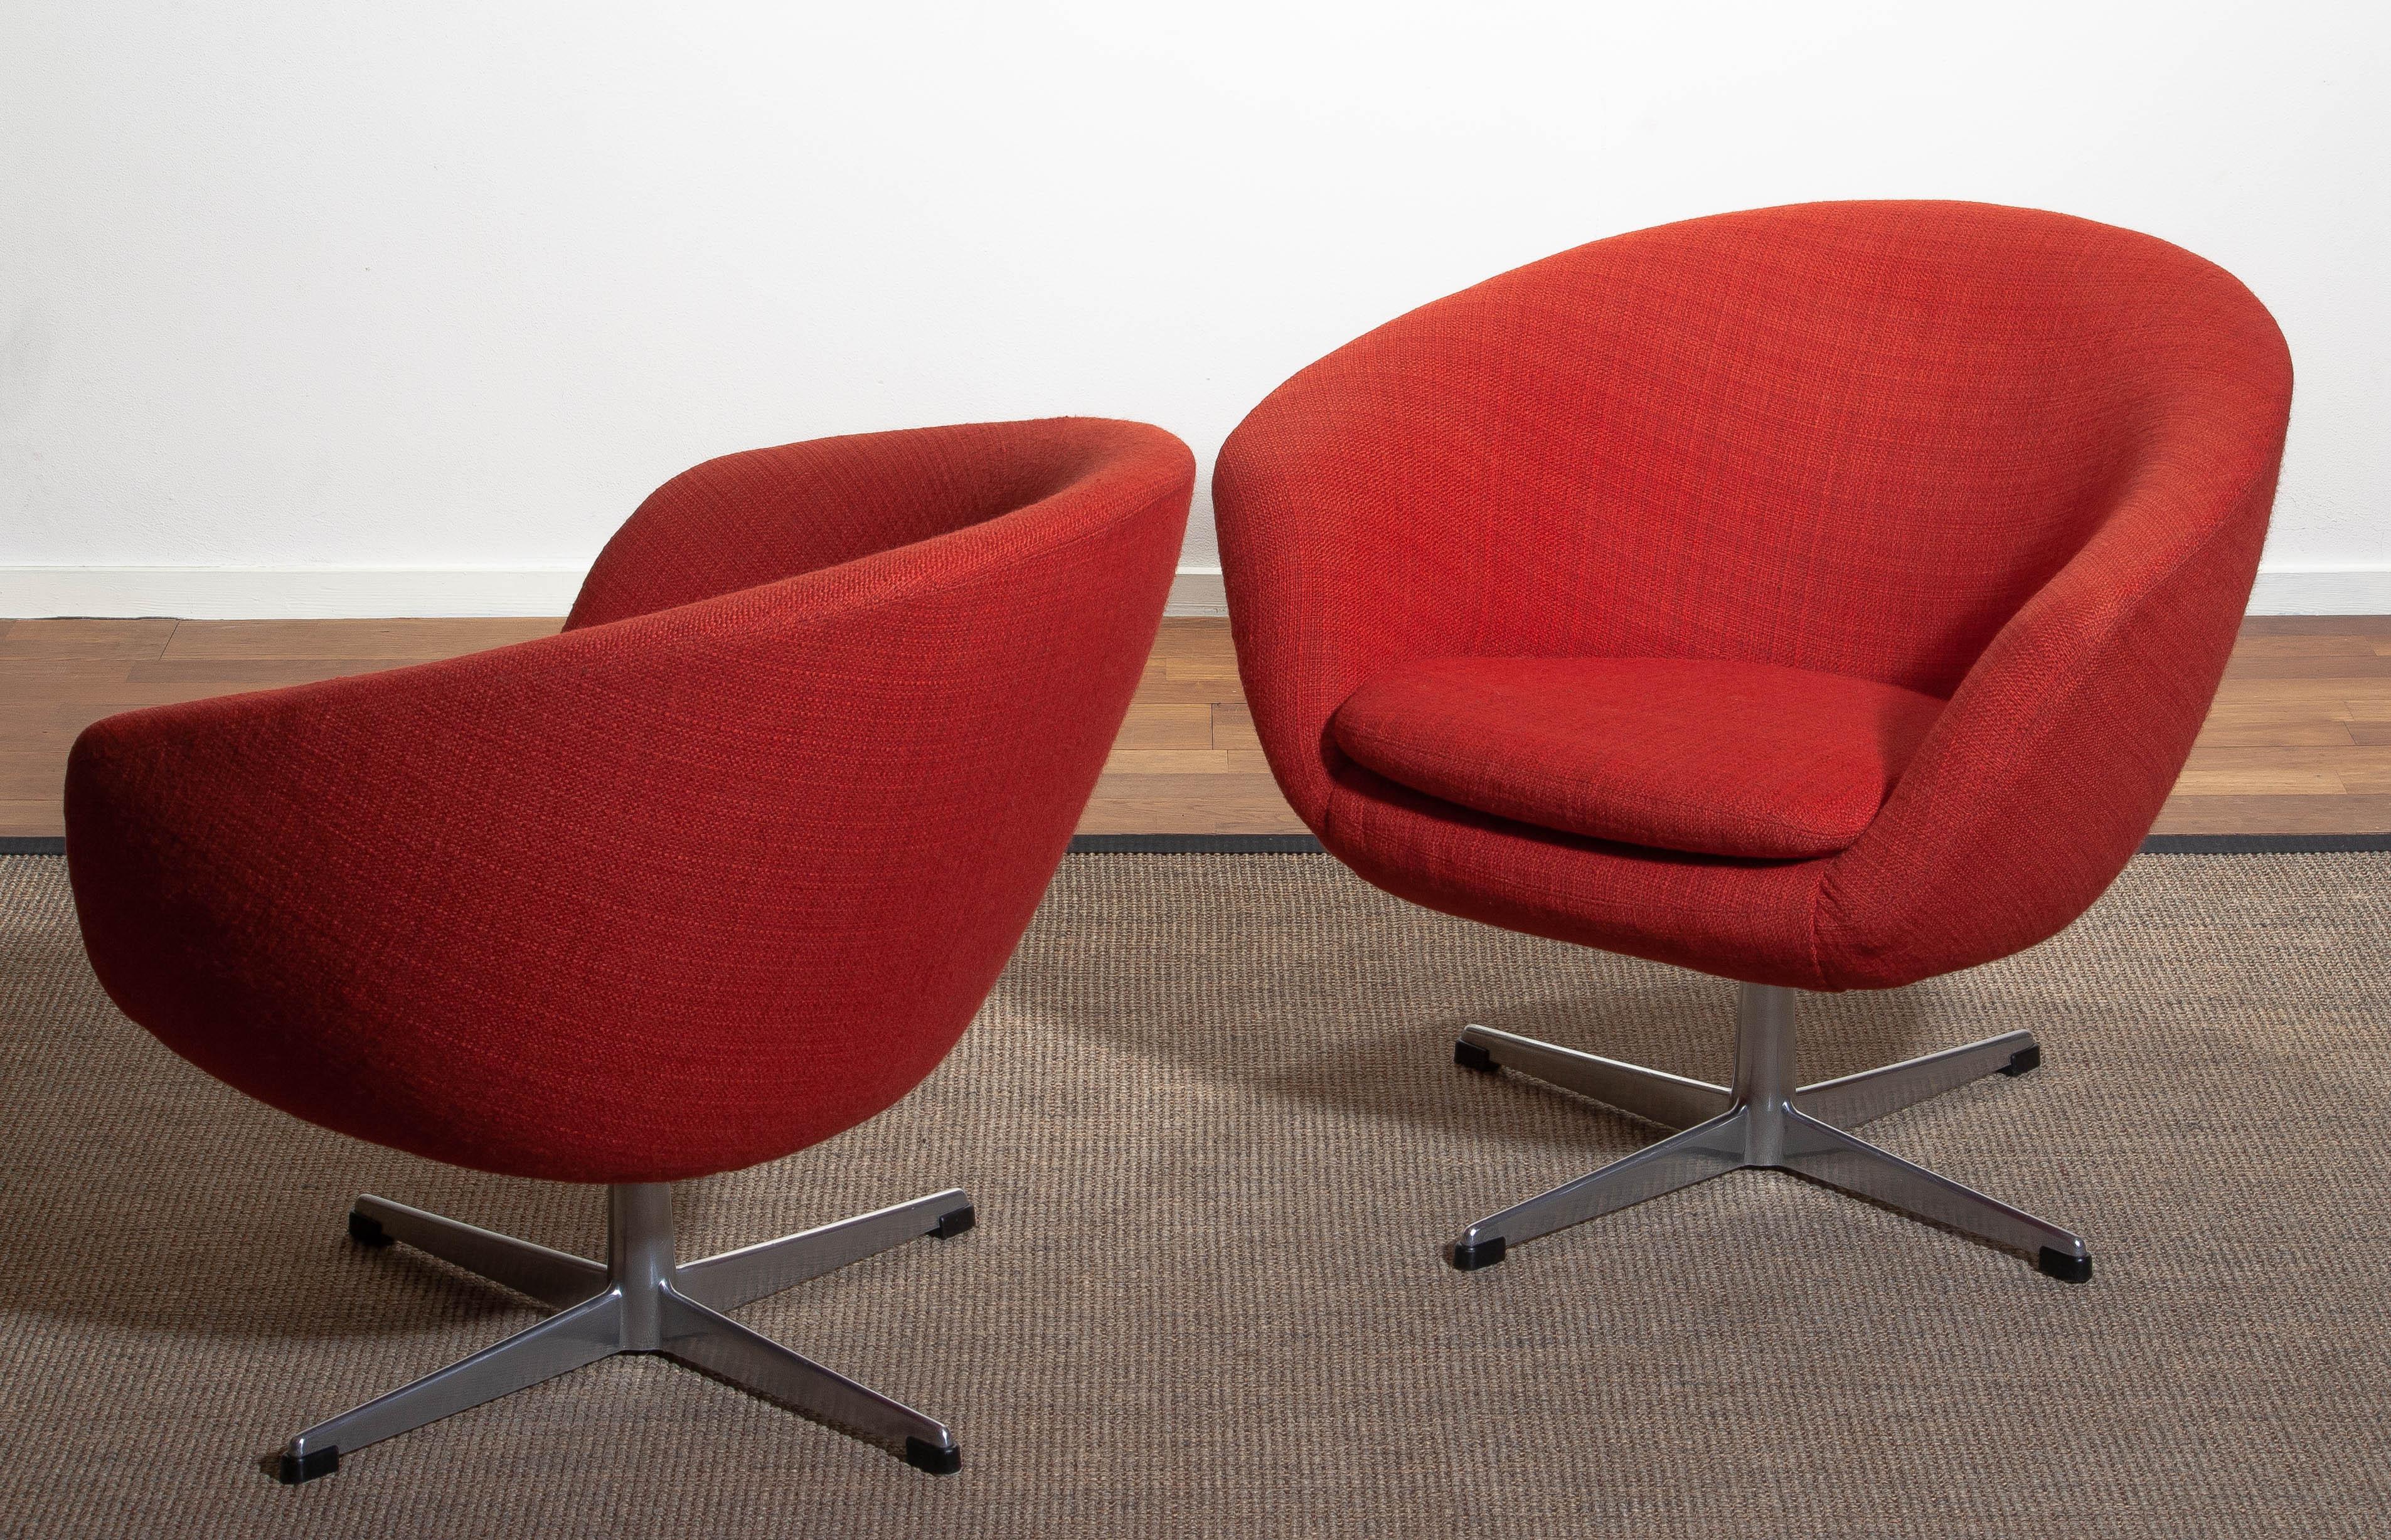 1960s, Pair of Swivel Lounge Chairs by Carl Eric Klote for Overman, Denmark 2